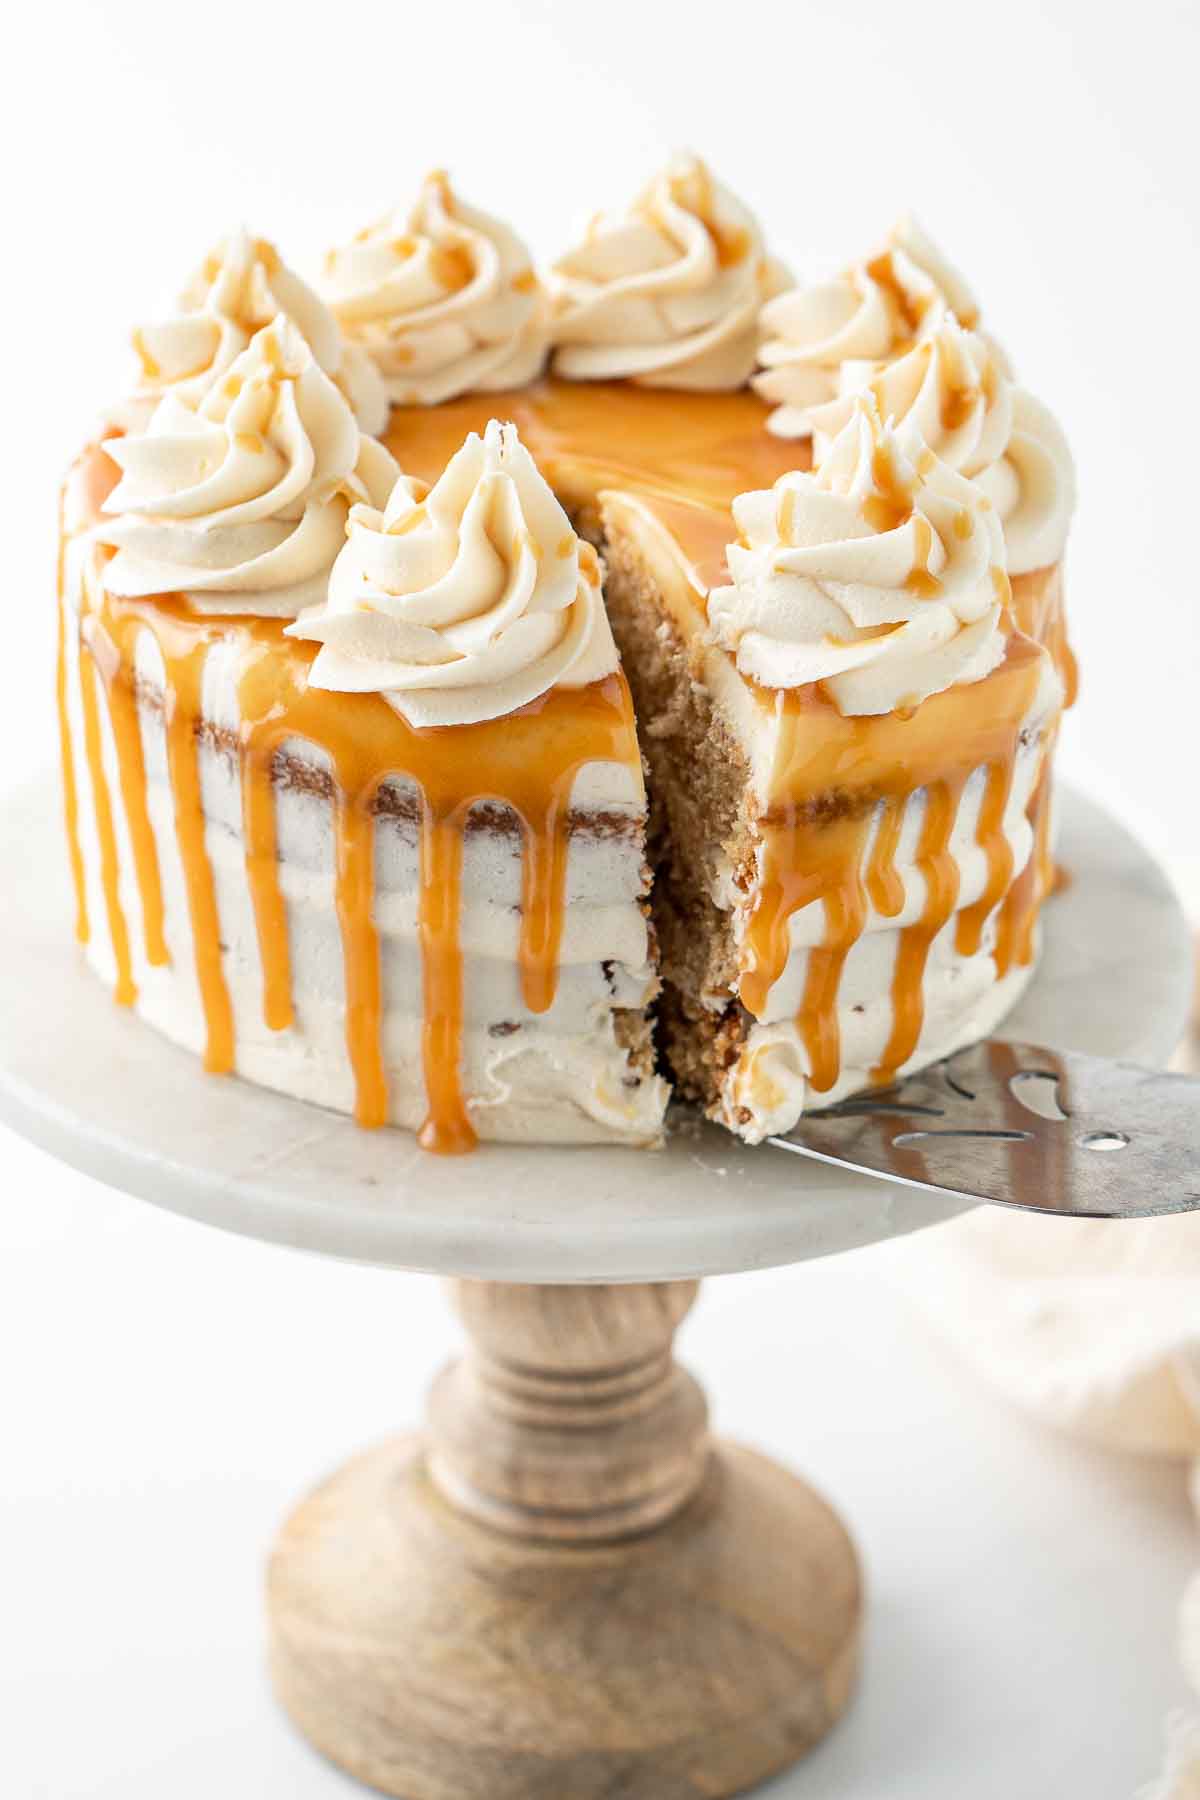 A slice of caramel cake being served from the cake stand.